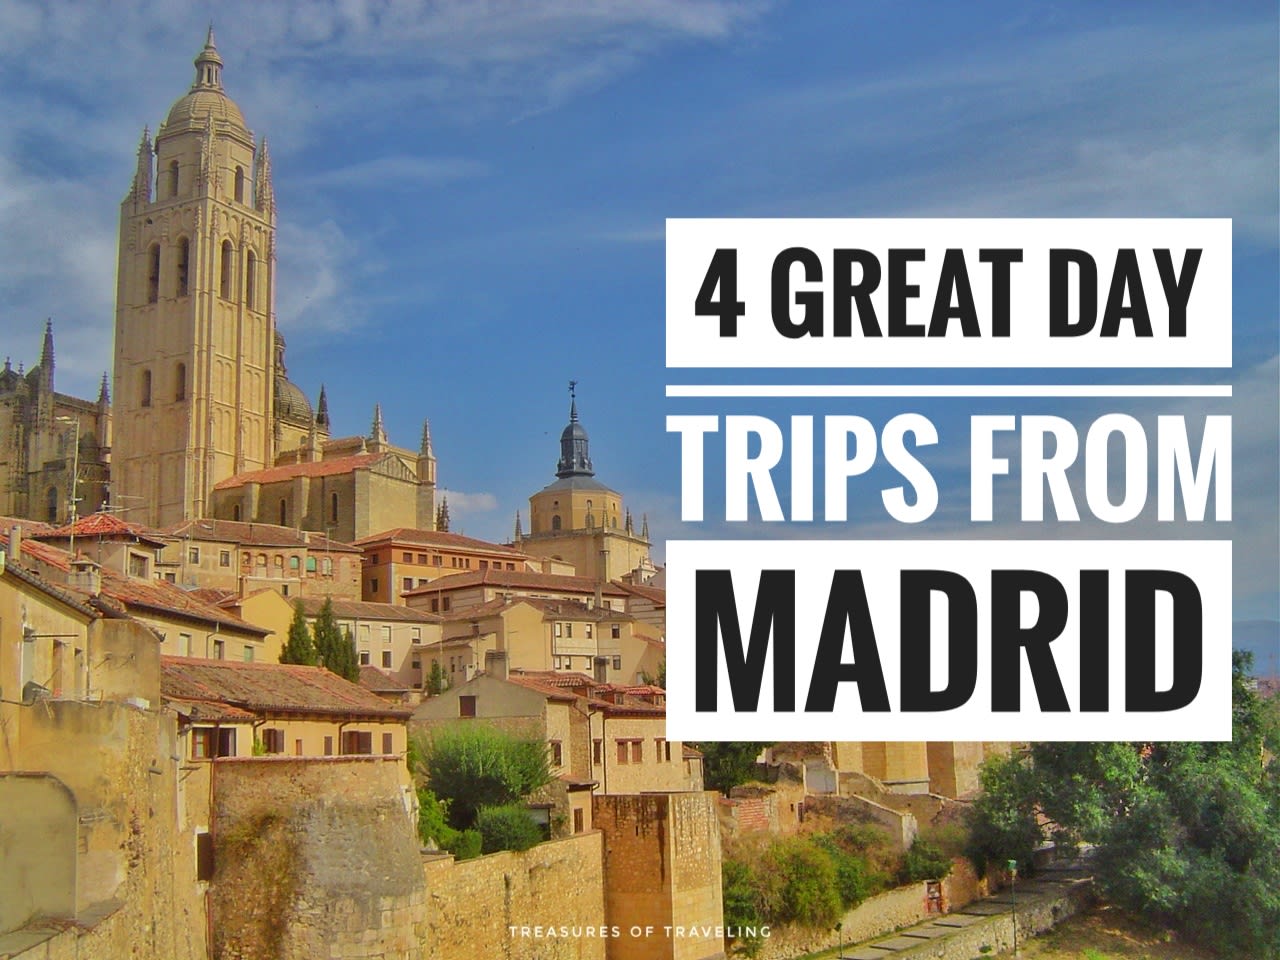 4 Great Day Trips From Madrid! - Treasures of Traveling